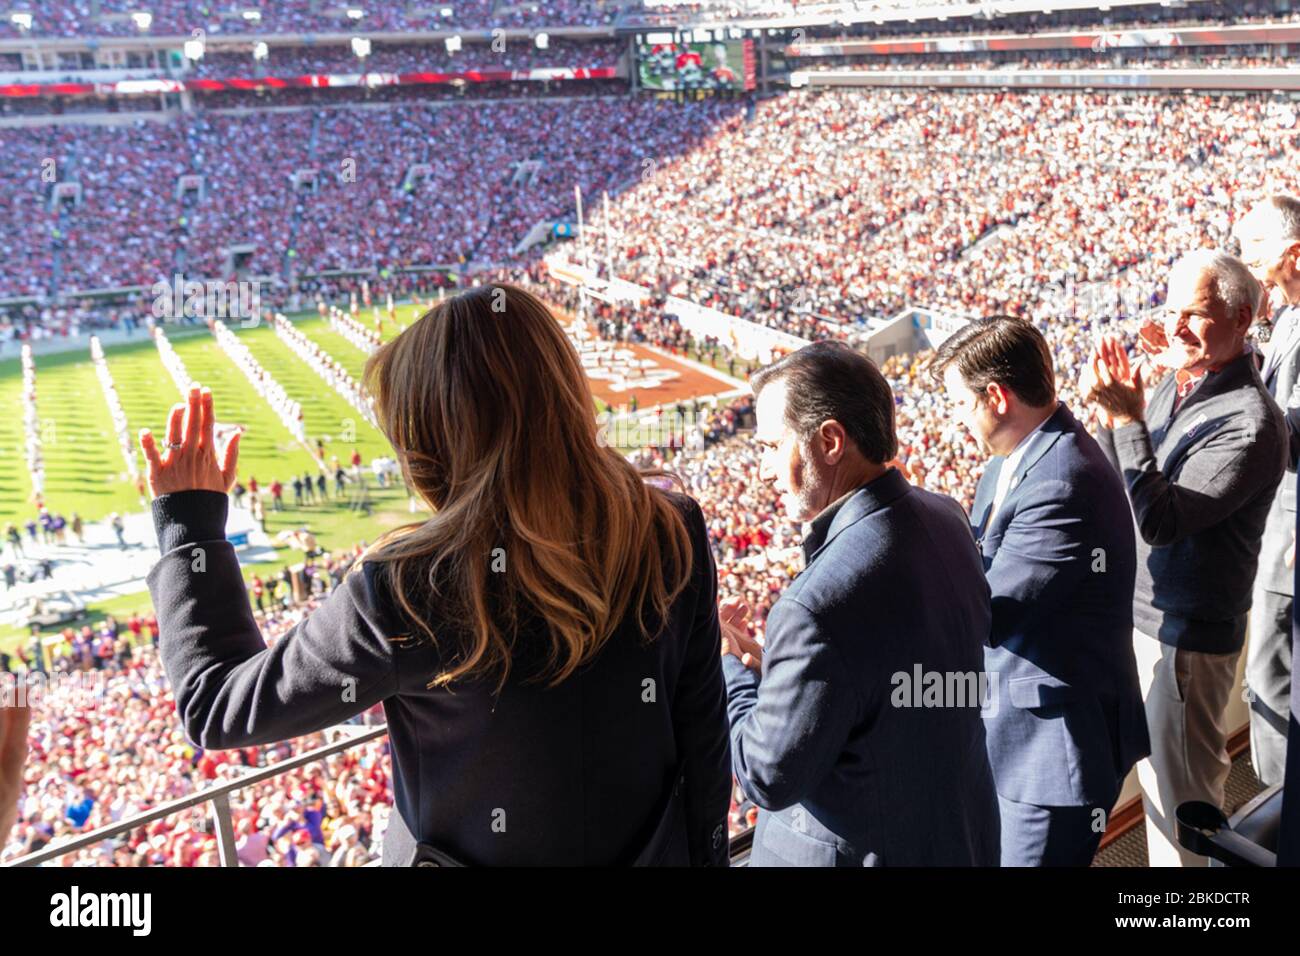 First Lady Melania Trump watches the action on the field at Bryant-Denny Stadium Saturday, Nov. 9, 2019, while attending the University of Alabama -Louisiana State University football game in Tuscaloosa, Ala. President Trump and First Lady Melania Trump in Alabama Stock Photo